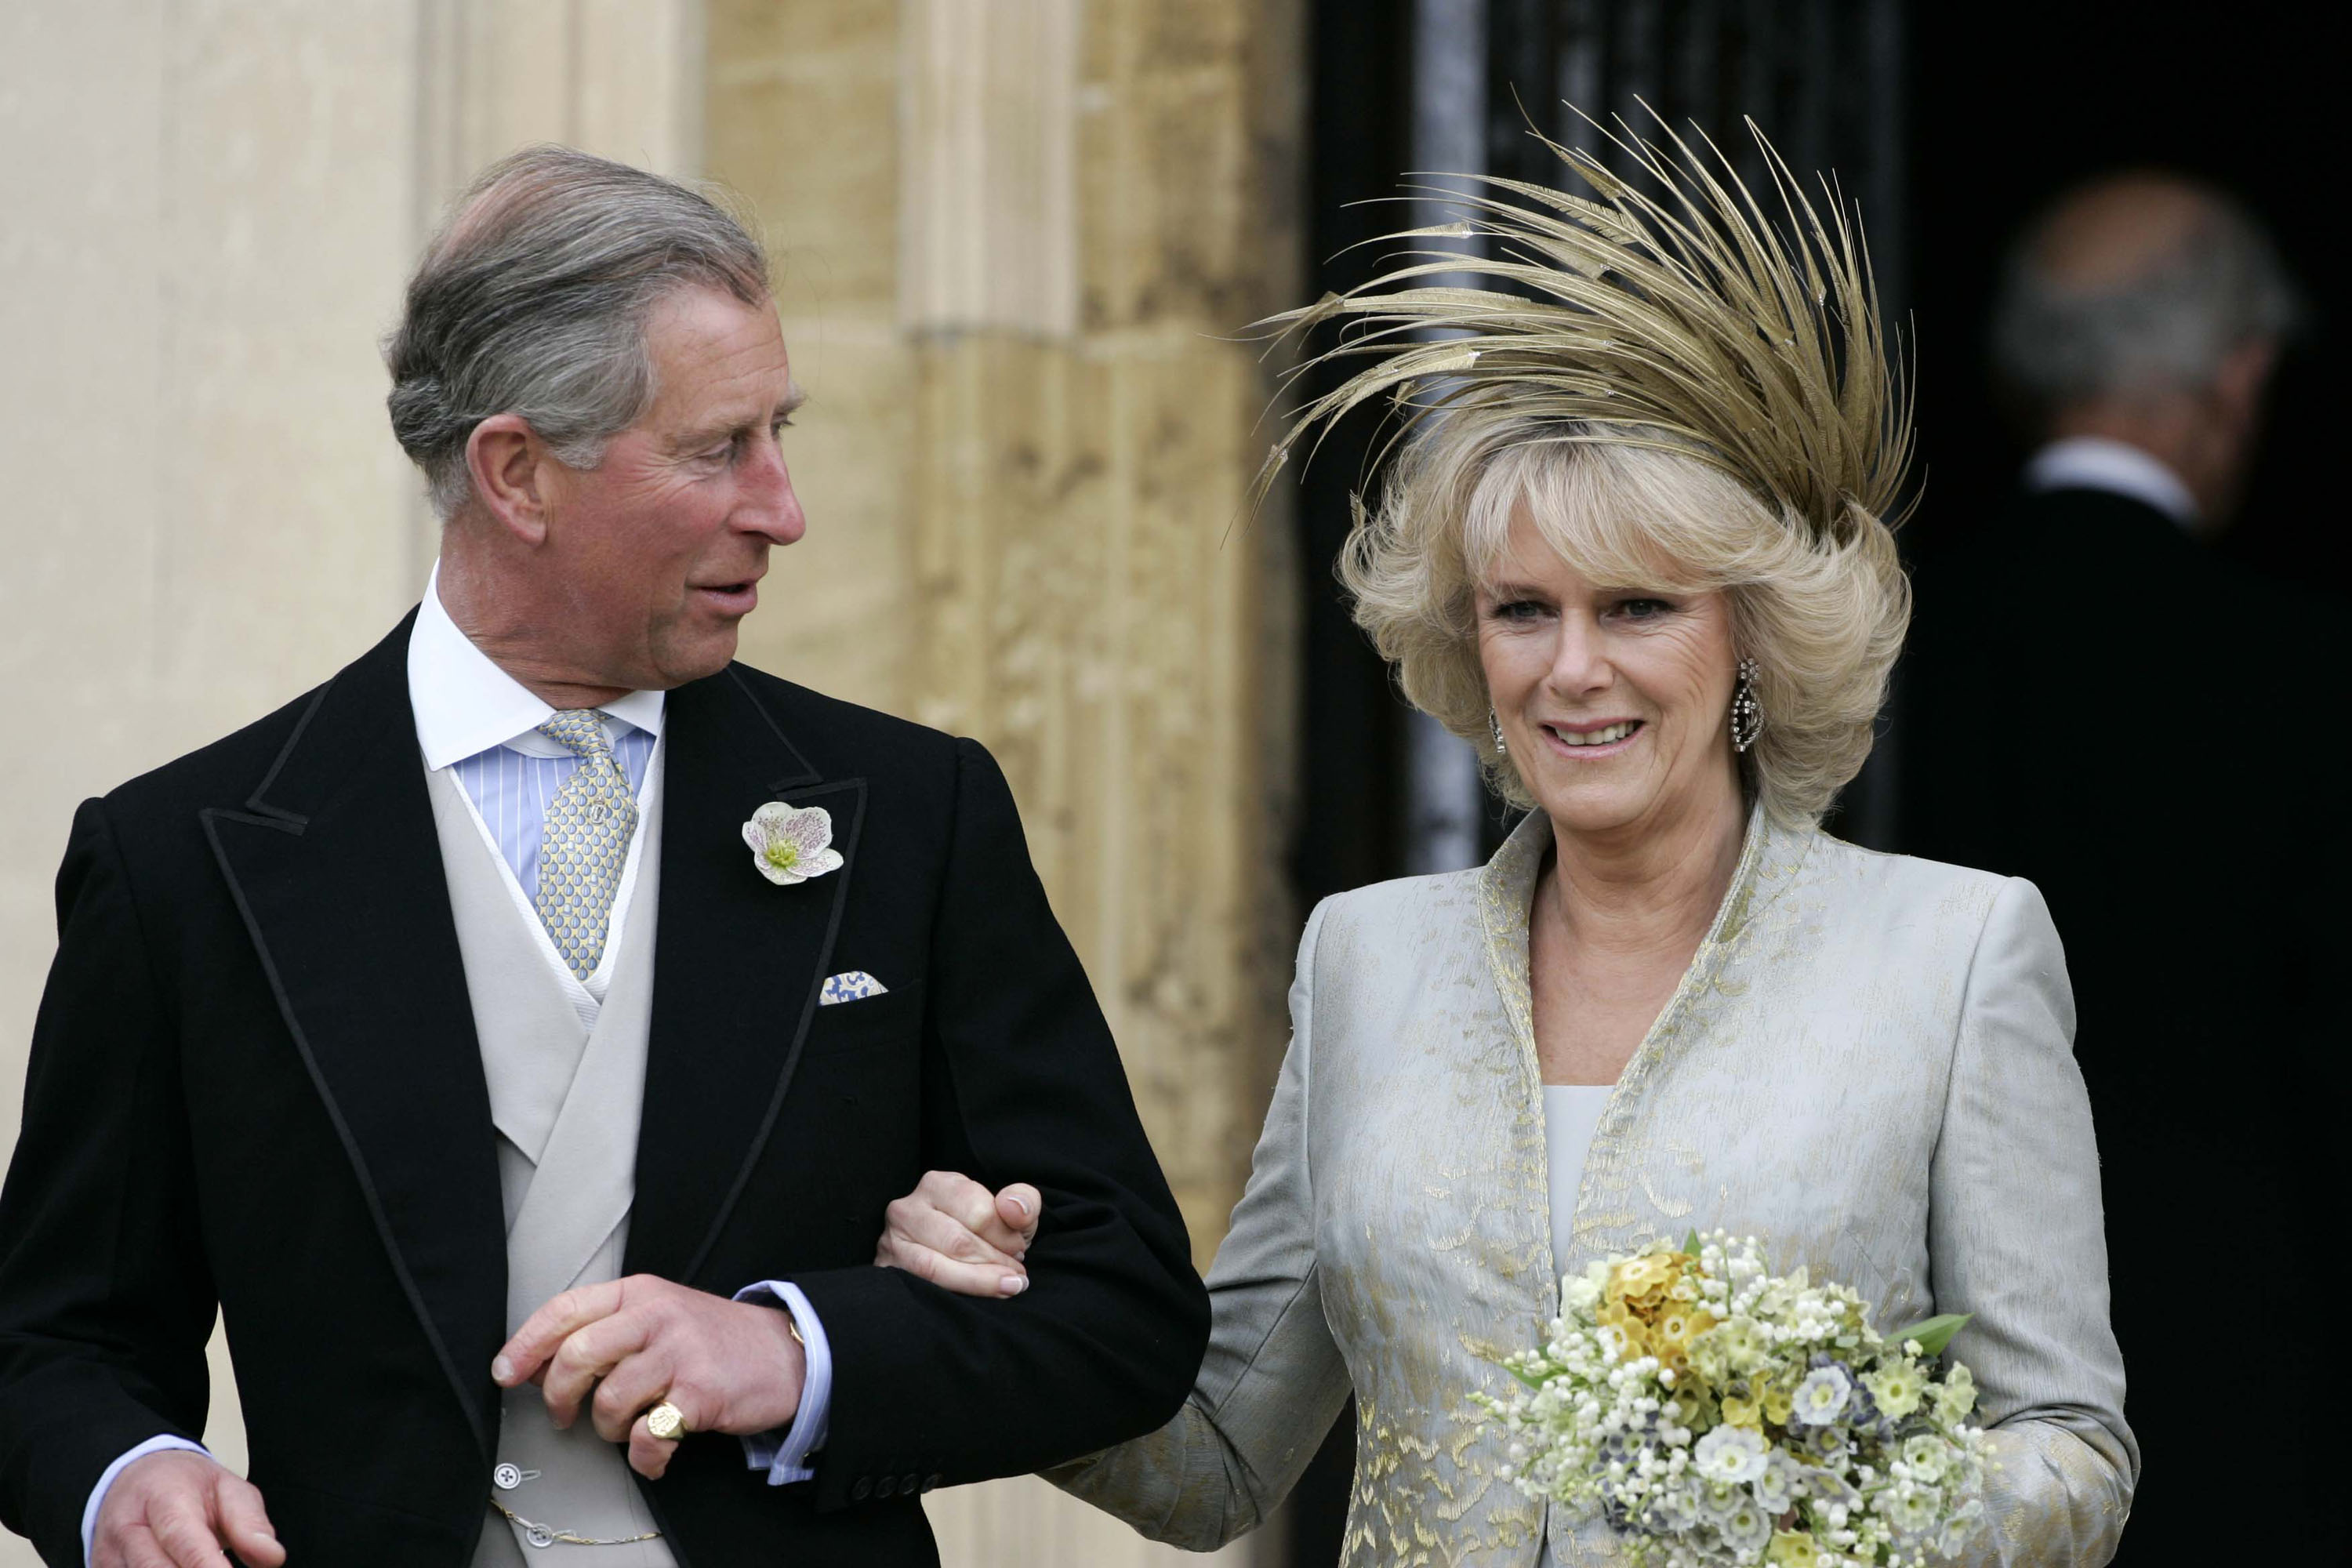 King Charles III and Queen Camilla walk arm-in-arm on their wedding day in 2005.